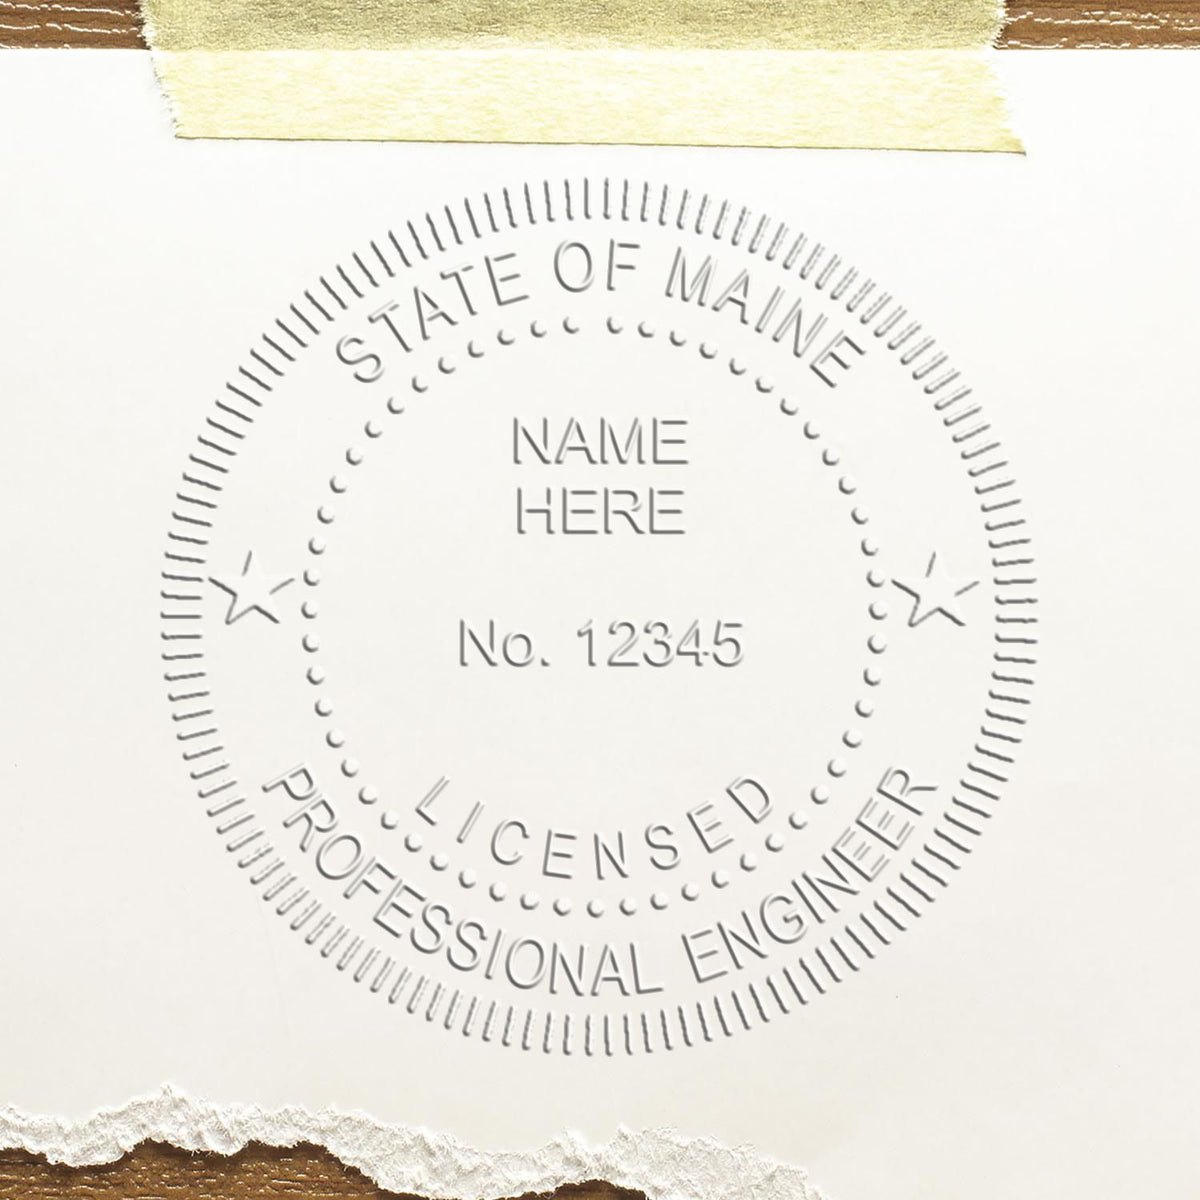 A stamped impression of the Maine Engineer Desk Seal in this stylish lifestyle photo, setting the tone for a unique and personalized product.